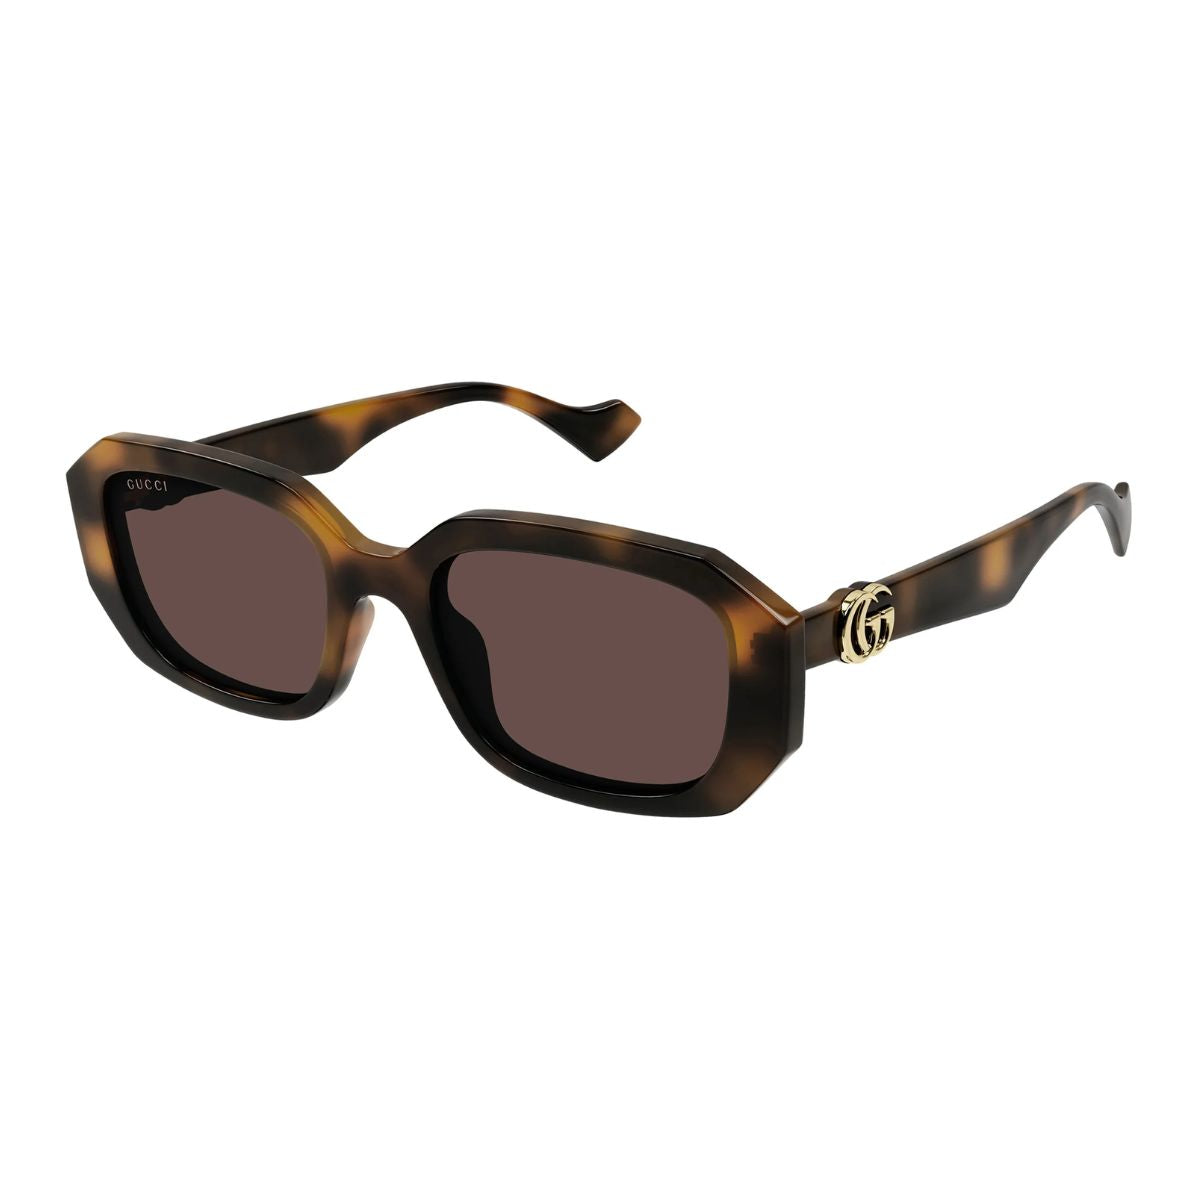 "Gucci 1535S 002 Eyewear for Women - Explore the Latest Styles at Optorium"